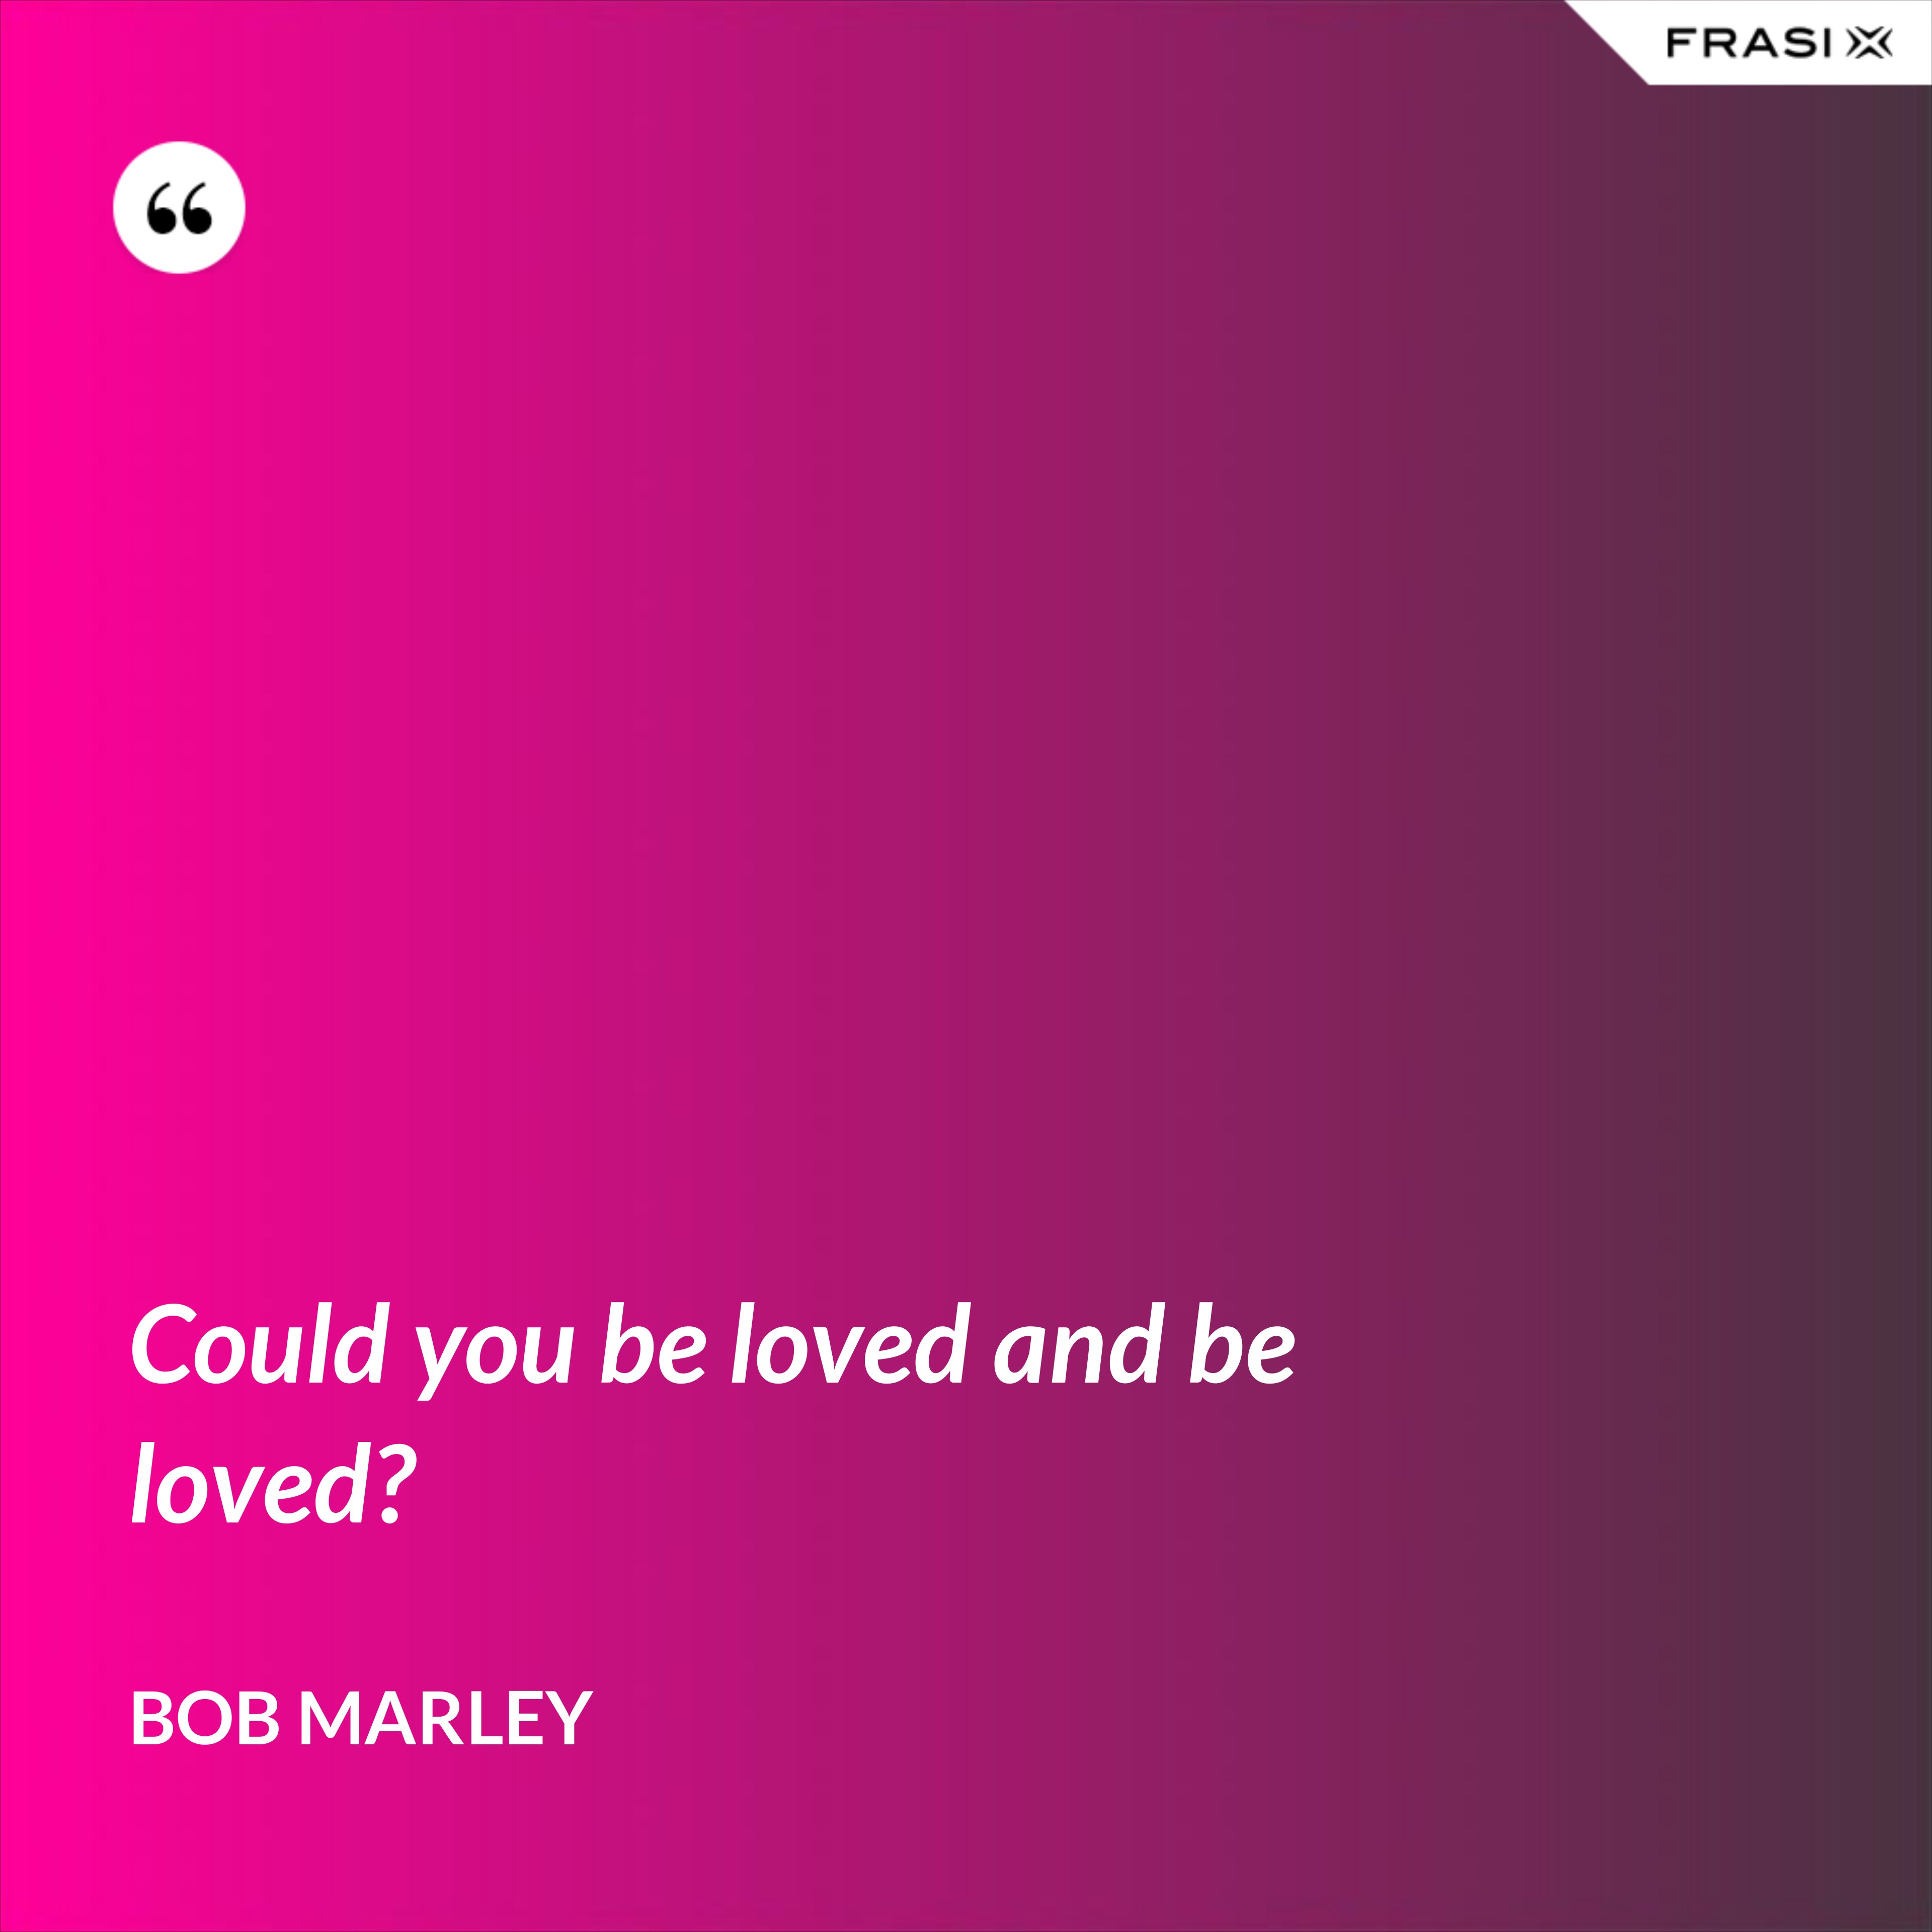 Could you be loved and be loved? - Bob Marley